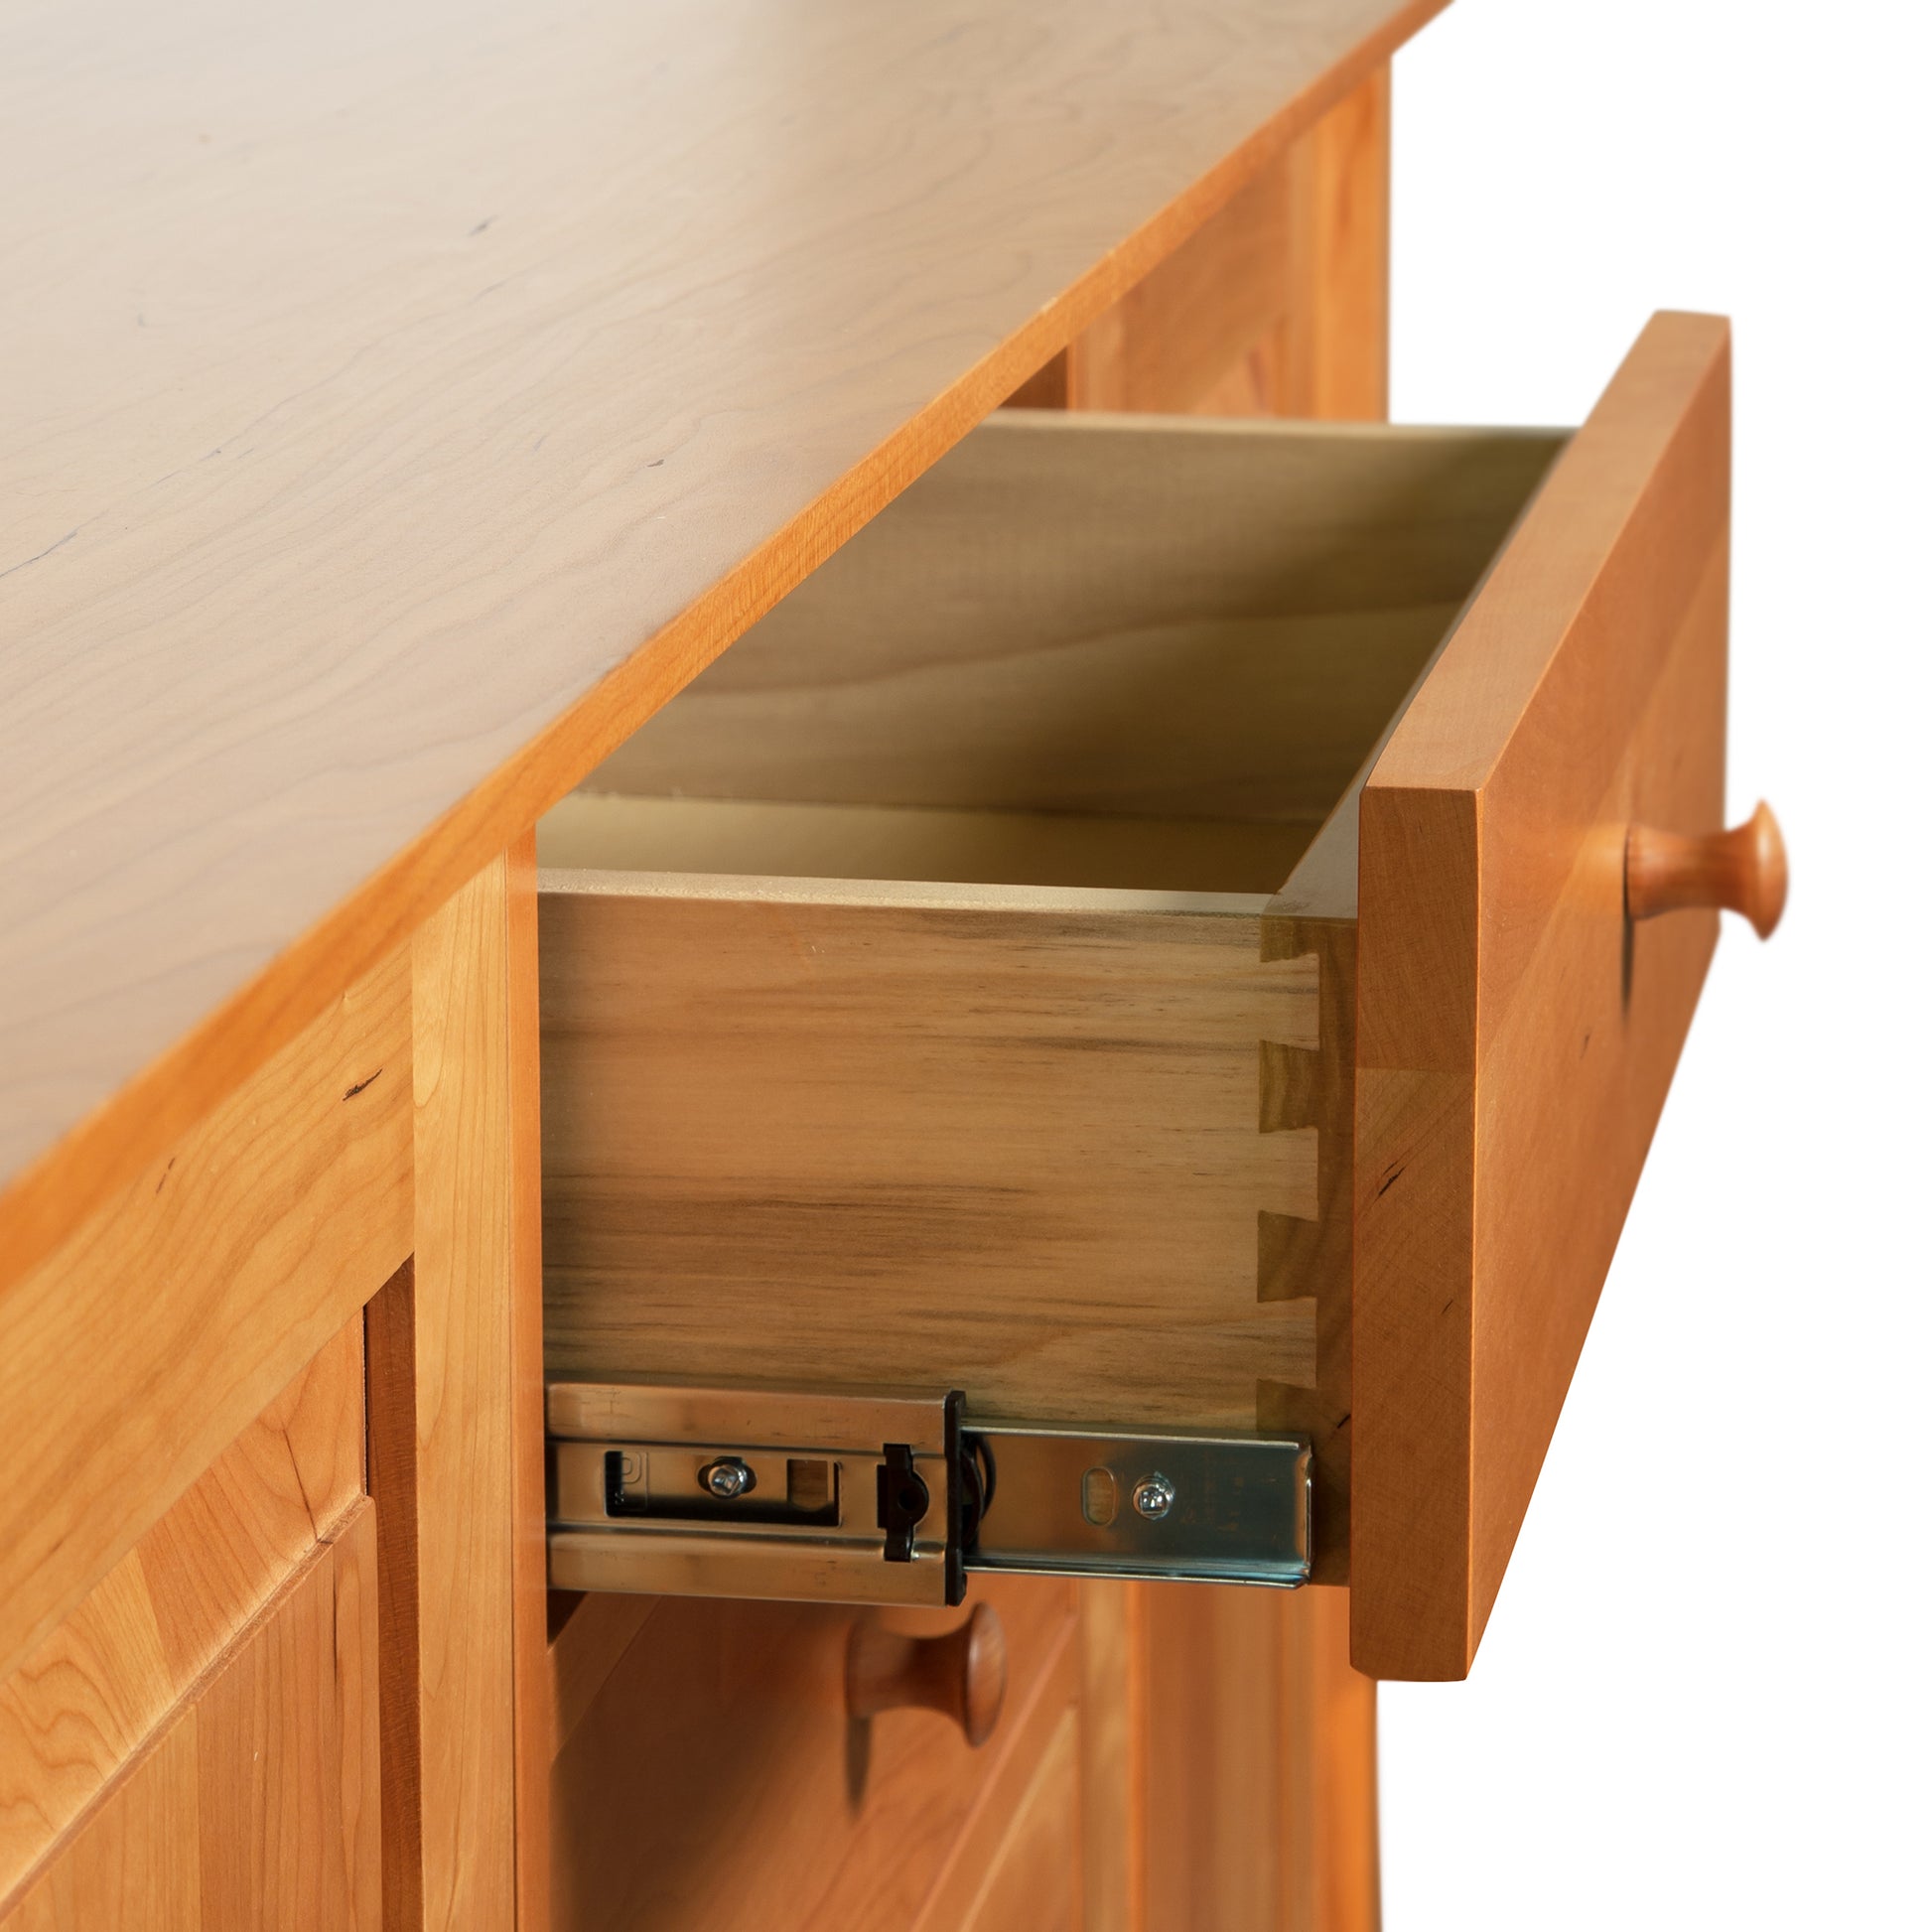 Lacquered Oak Join Wood Cabinet Knobs and Drawer Handles – Forge Hardware  Studio